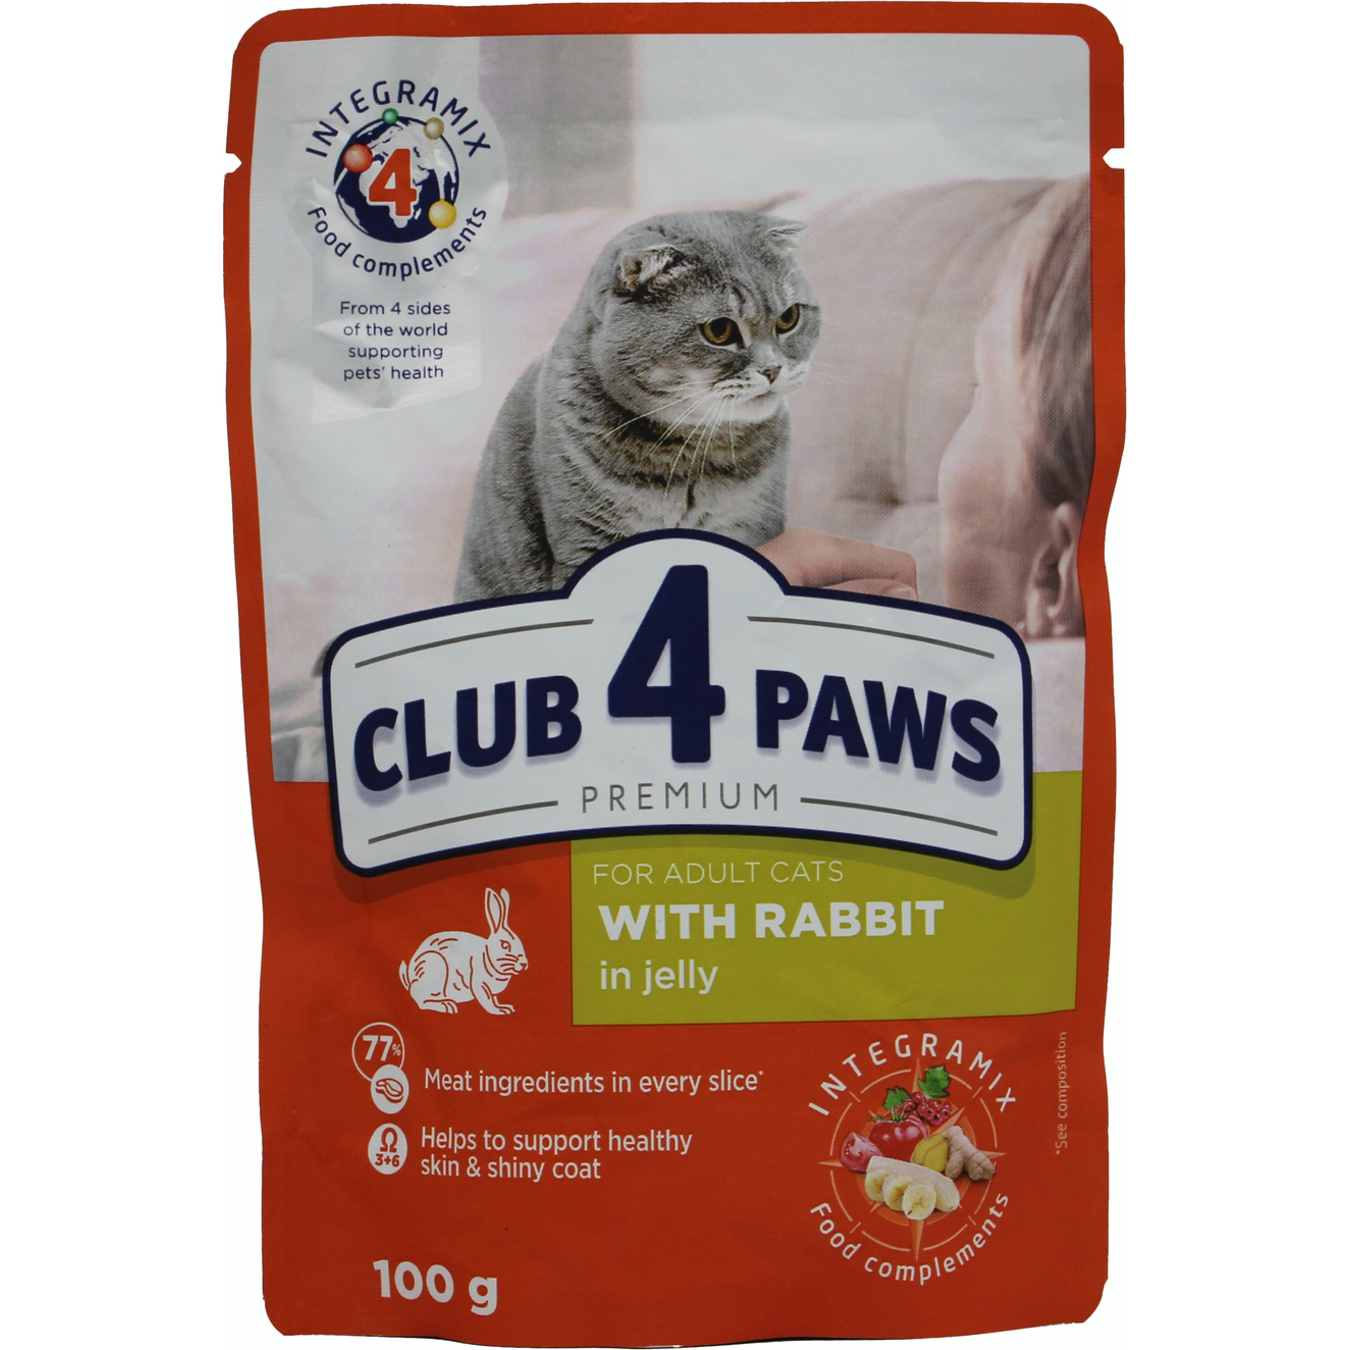 Feed Club 4 Paws Premium rabbit jelly for cats 100g